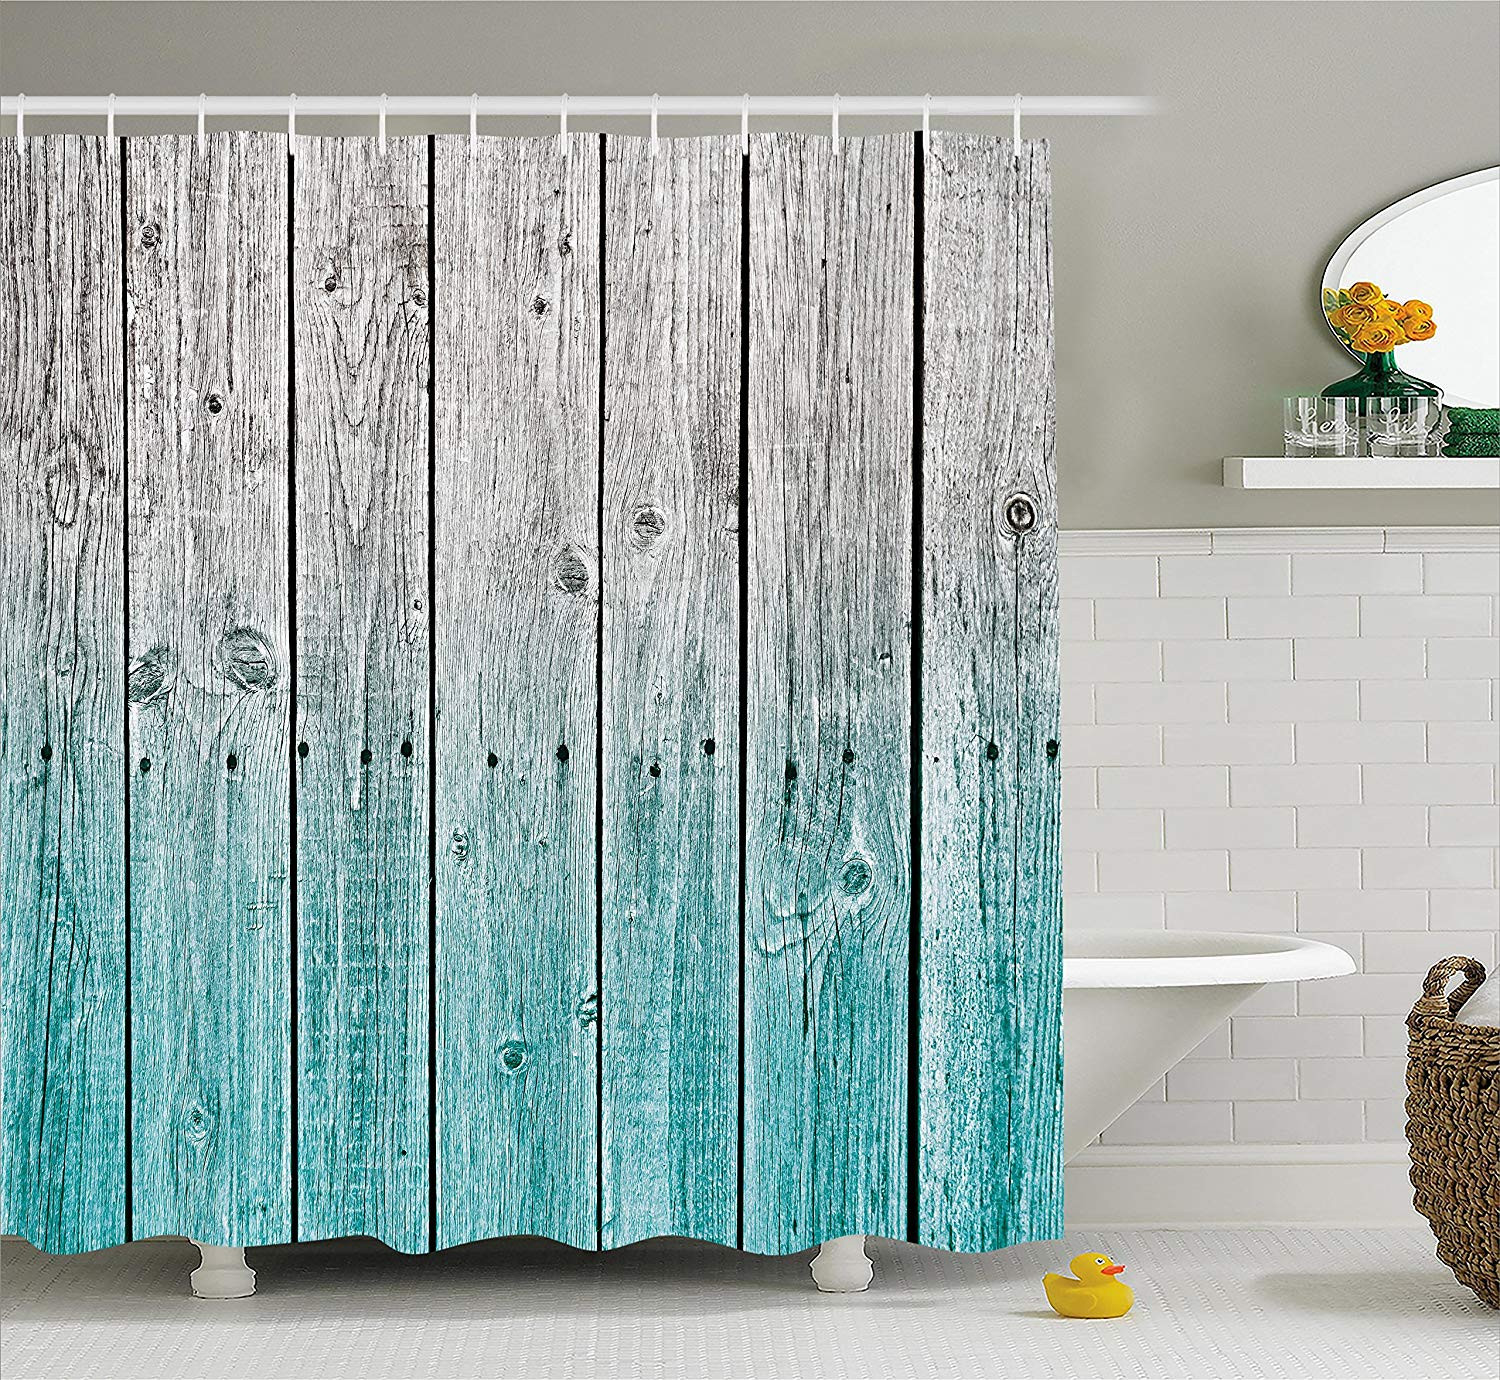 Rustic Bathroom Shower Curtain
 Rustic Shower Curtain Wood Panels Background with Digital